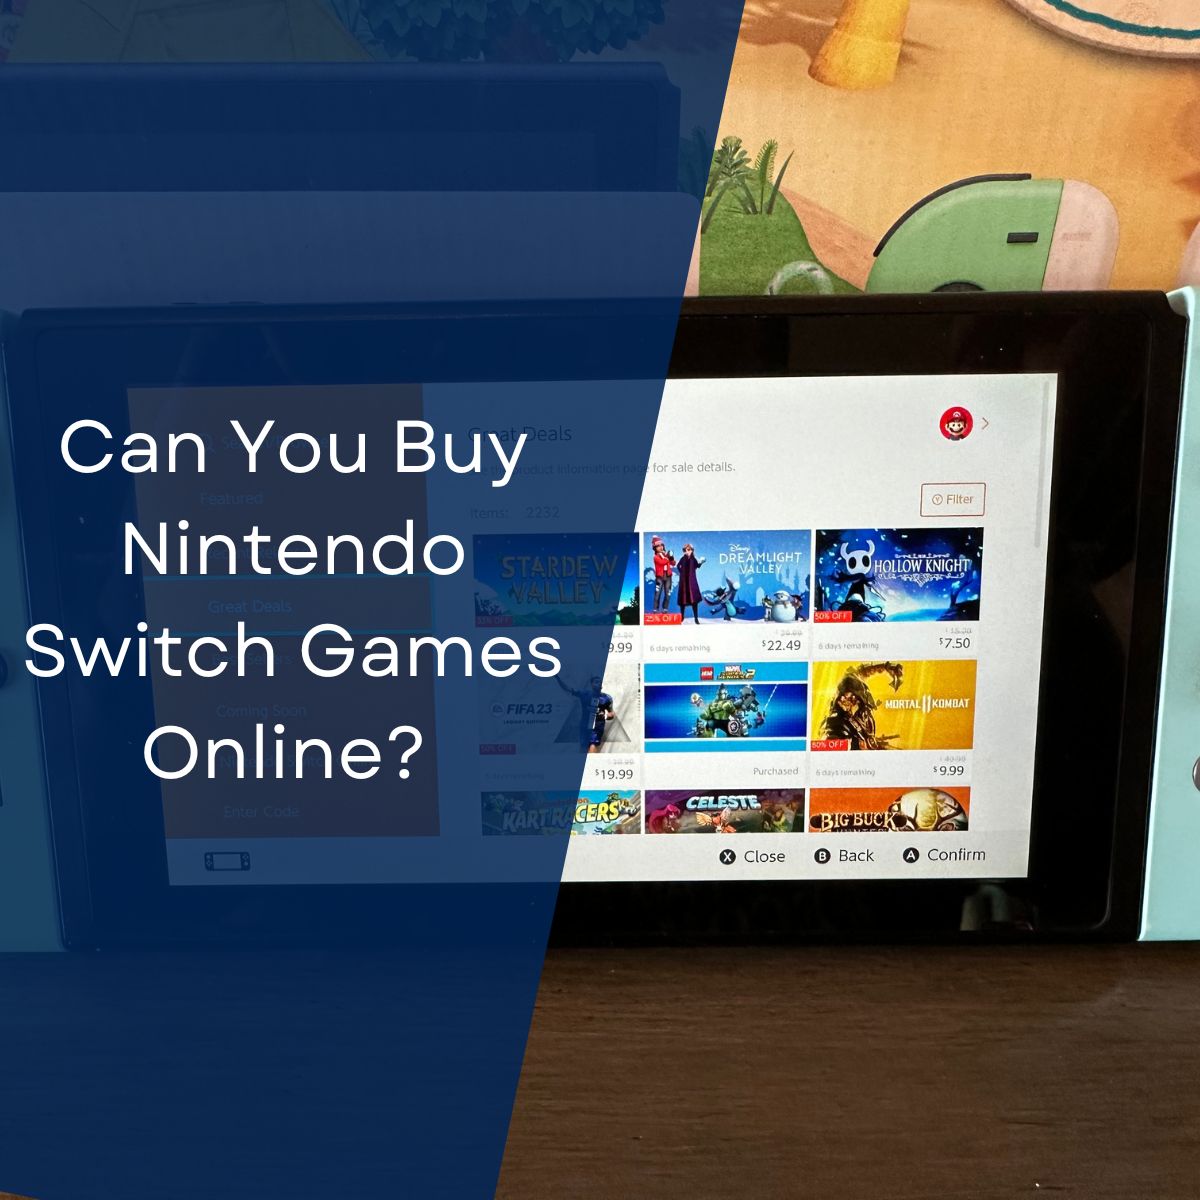 Can You Buy Nintendo Switch Games Online? Nintendo Switch Online